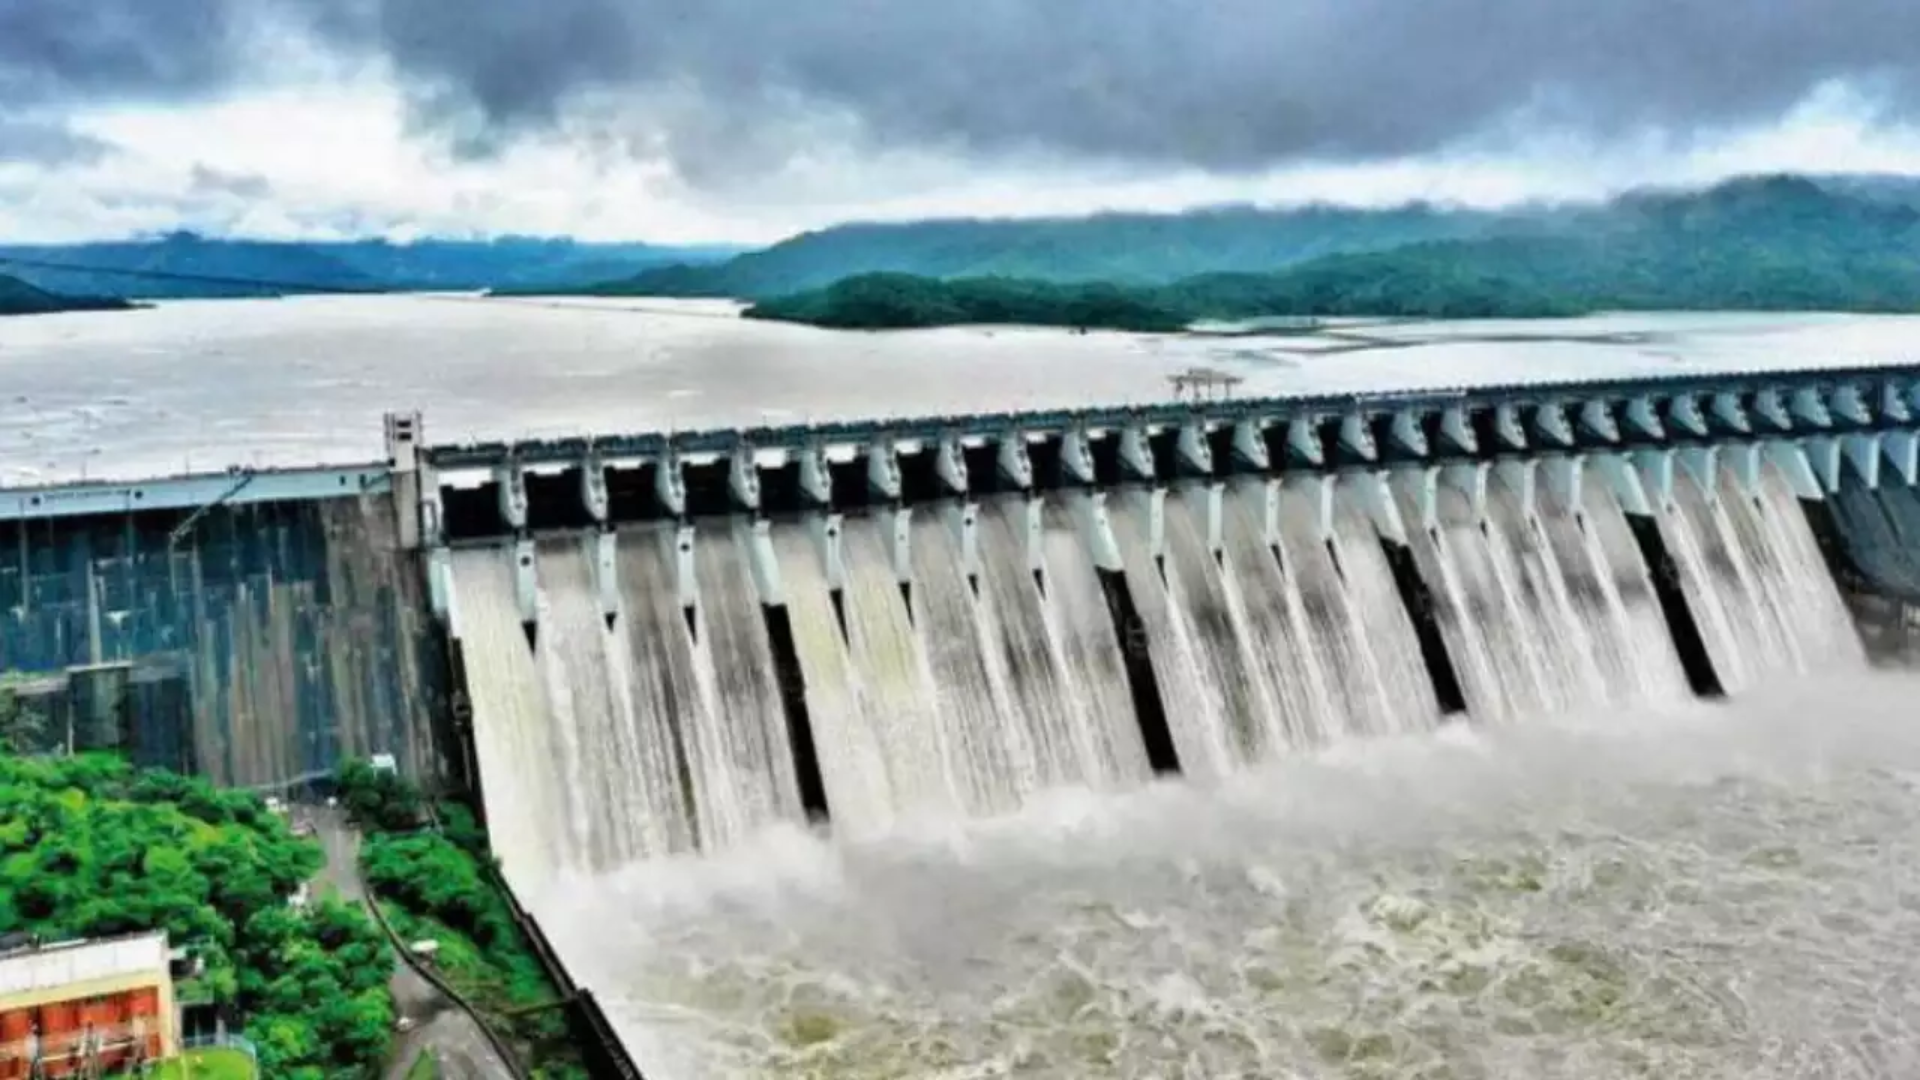 Gujarat Plans To Ask For Bigger Narmada Water Share After December